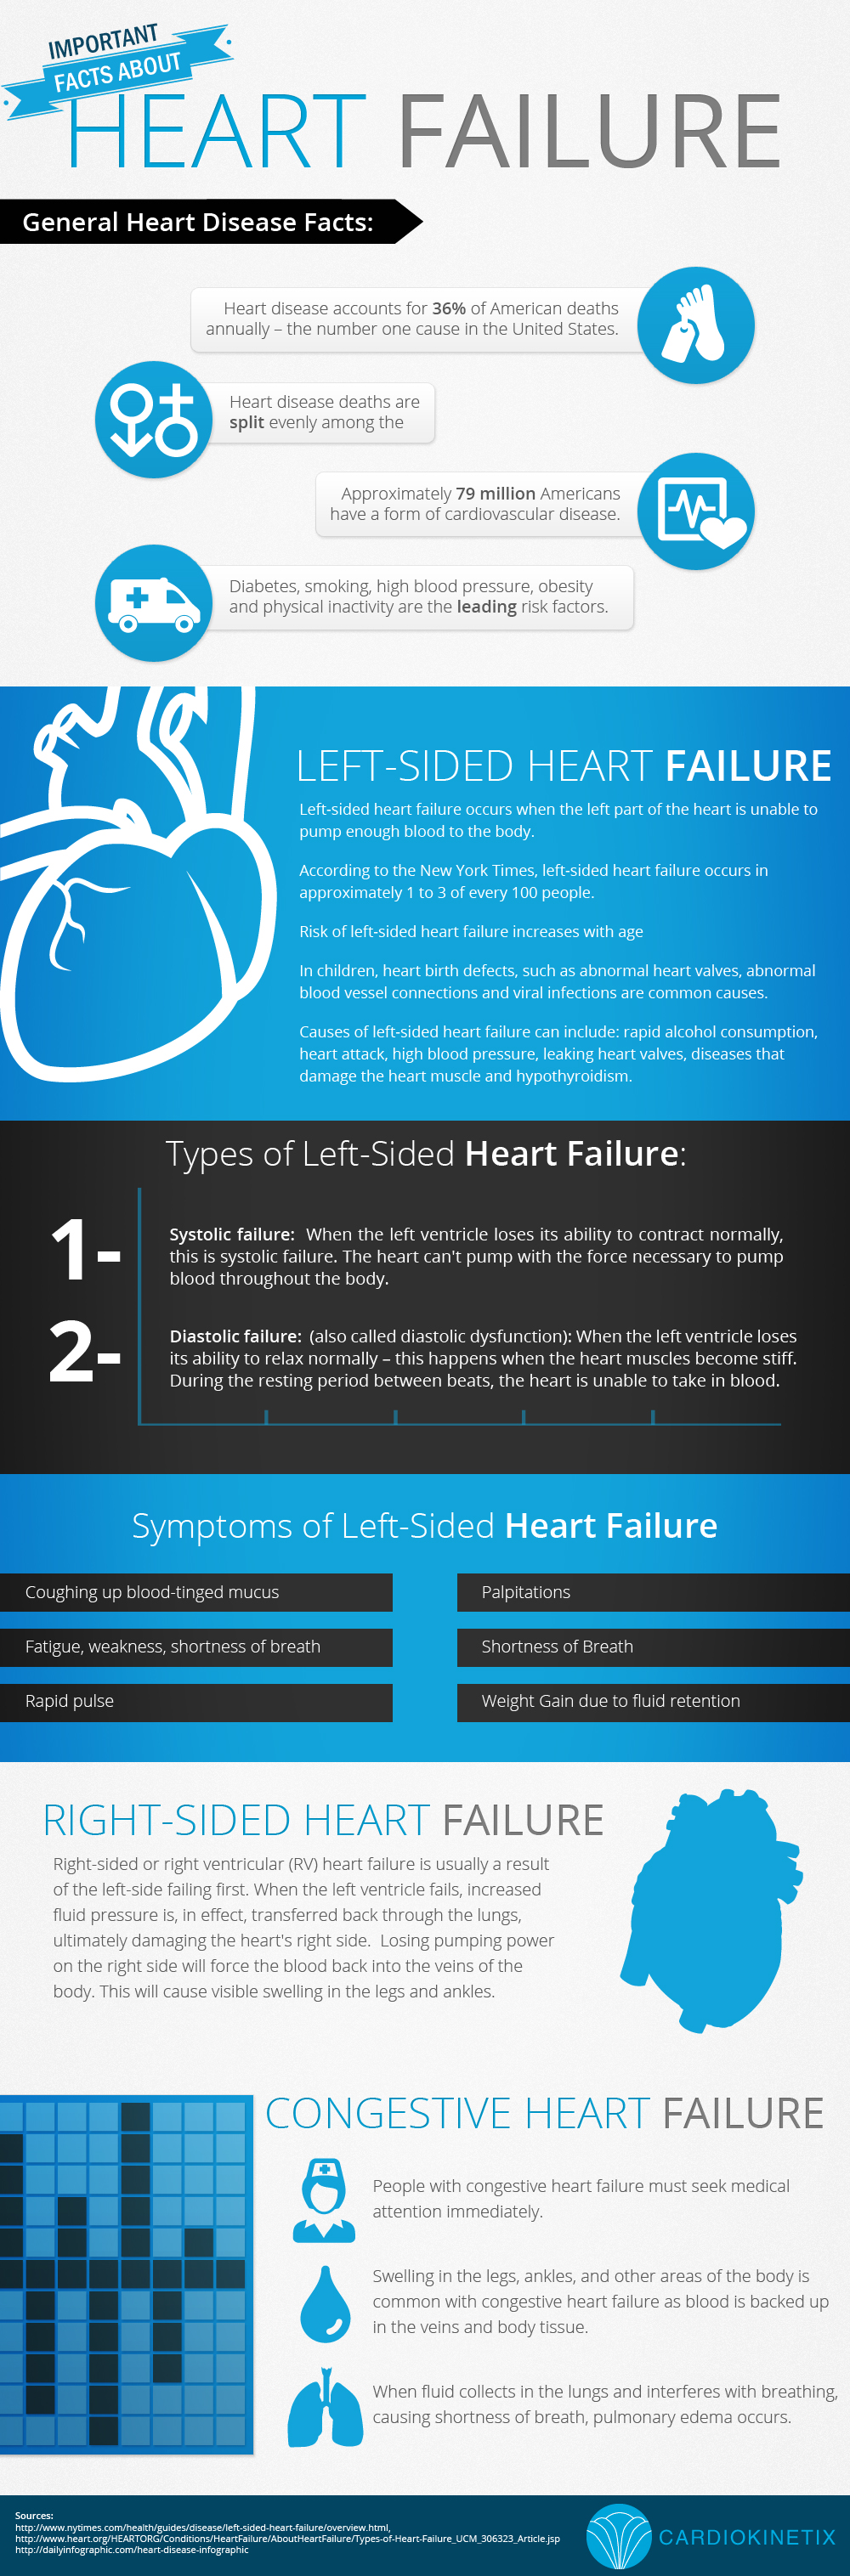 Important Facts About Heart Failure